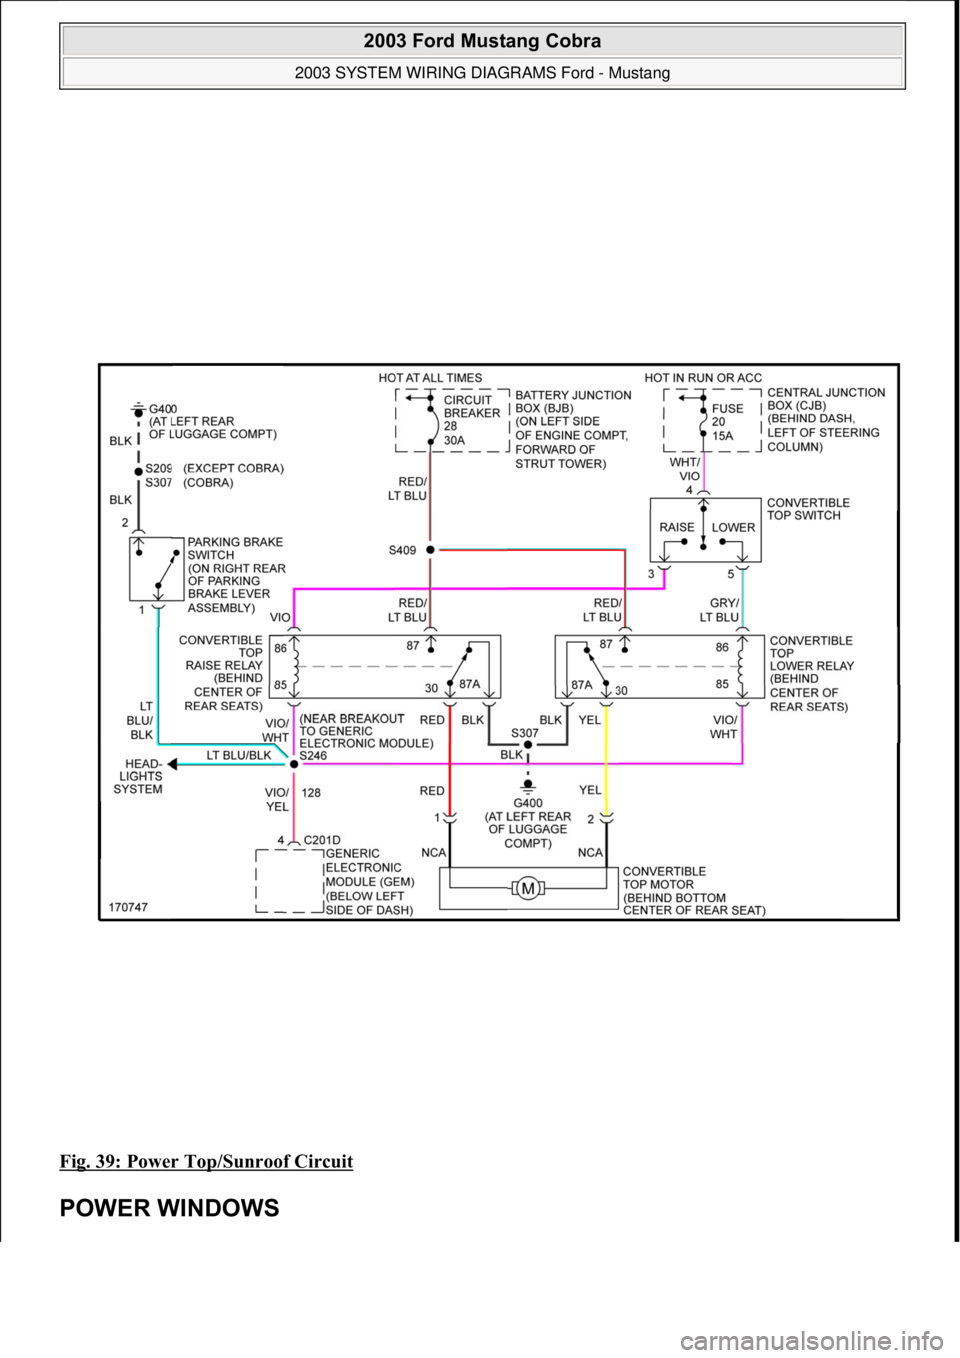 FORD MUSTANG 2003  Workshop Manual Fig. 39: Power Top/Sunroof Circuit 
POWER WINDOWS 
 
2003 Ford Mustang Cobra 
2003 SYSTEM WIRING DIAGRAMS Ford - Mustang  
111  
18 ноября  2011 г. 12:47:06Page 40 © 2006 Mitchell Repair Infor